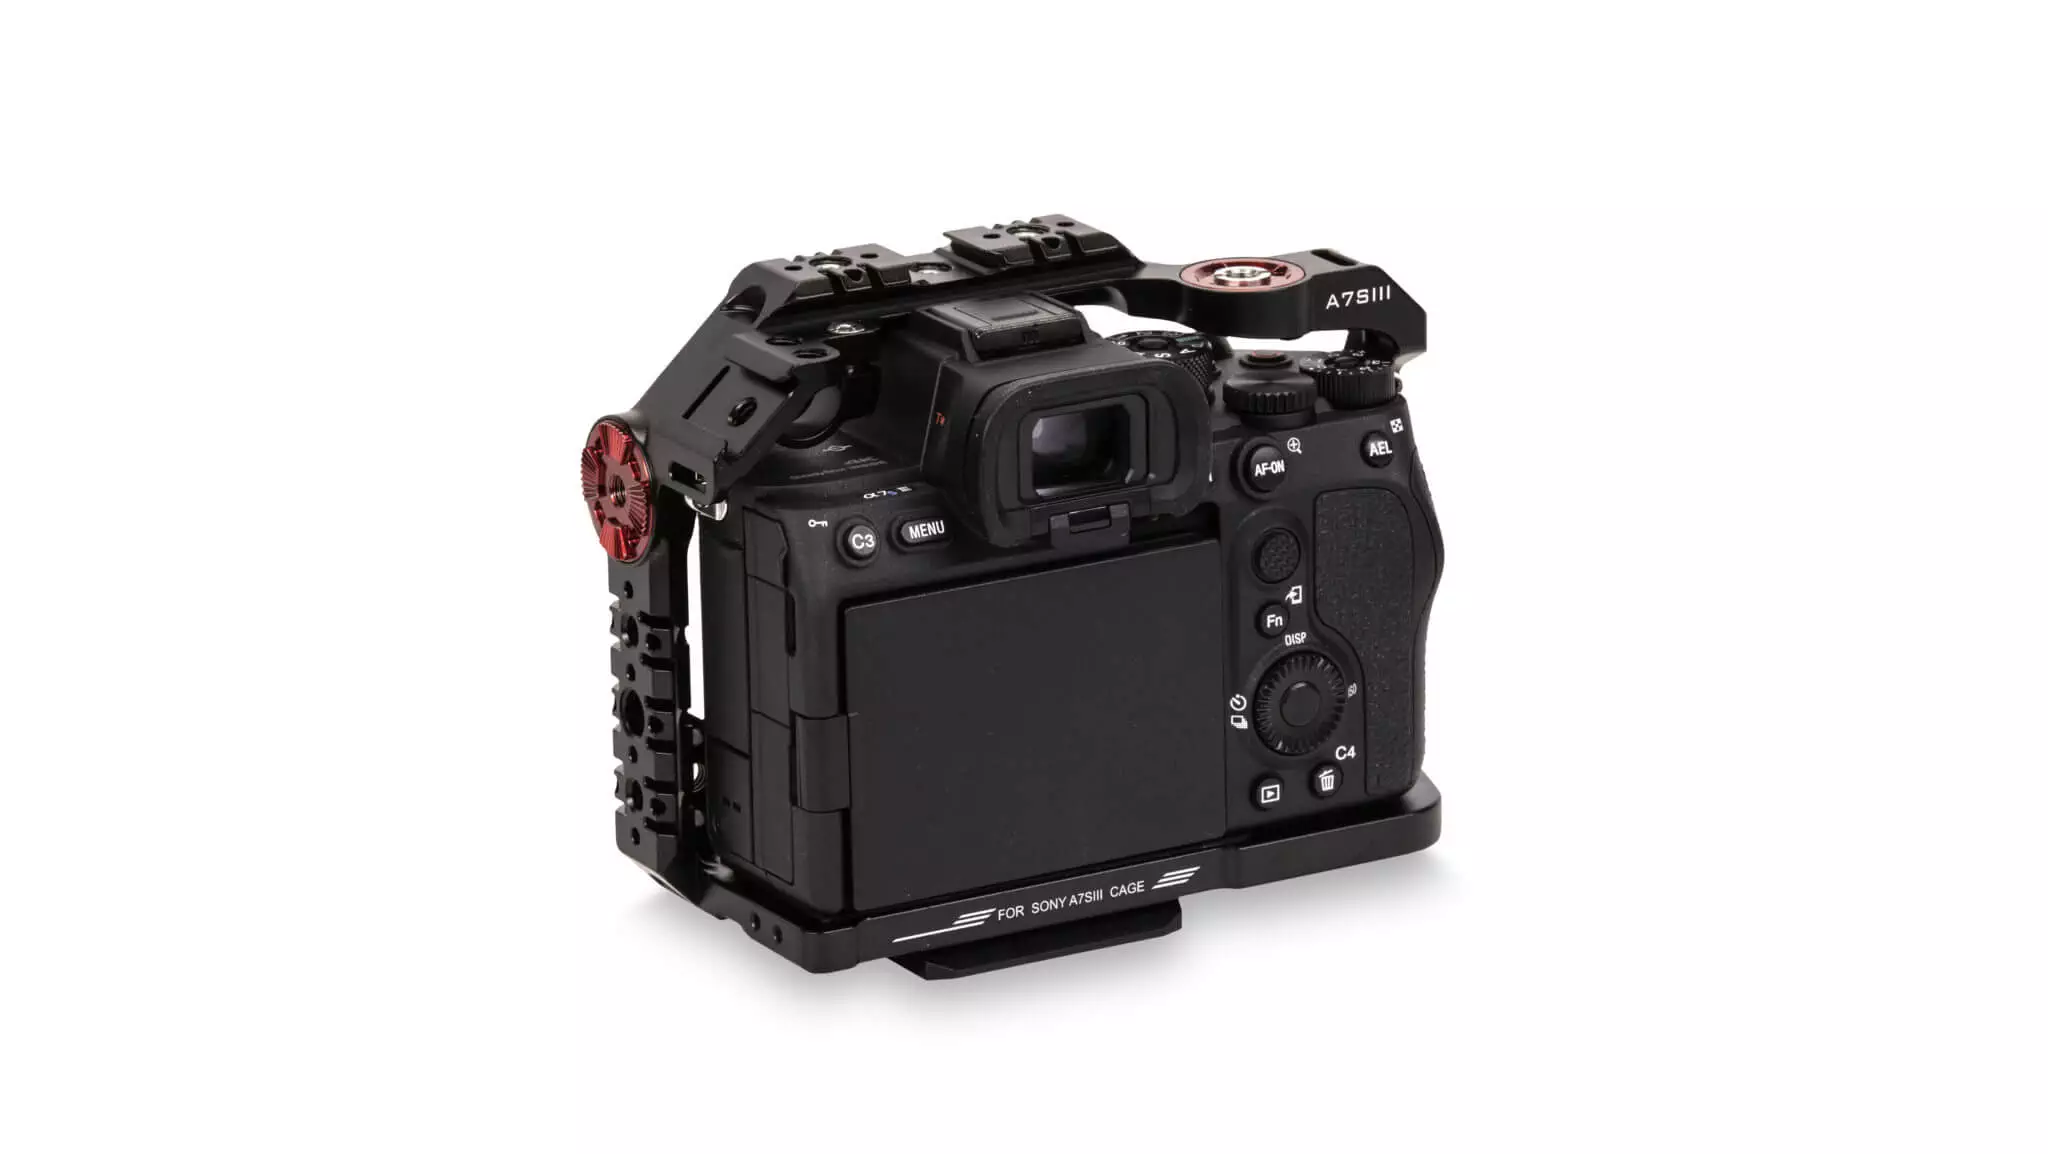 Tilta Full Camera Cage for Sony a7a9 SIII Series